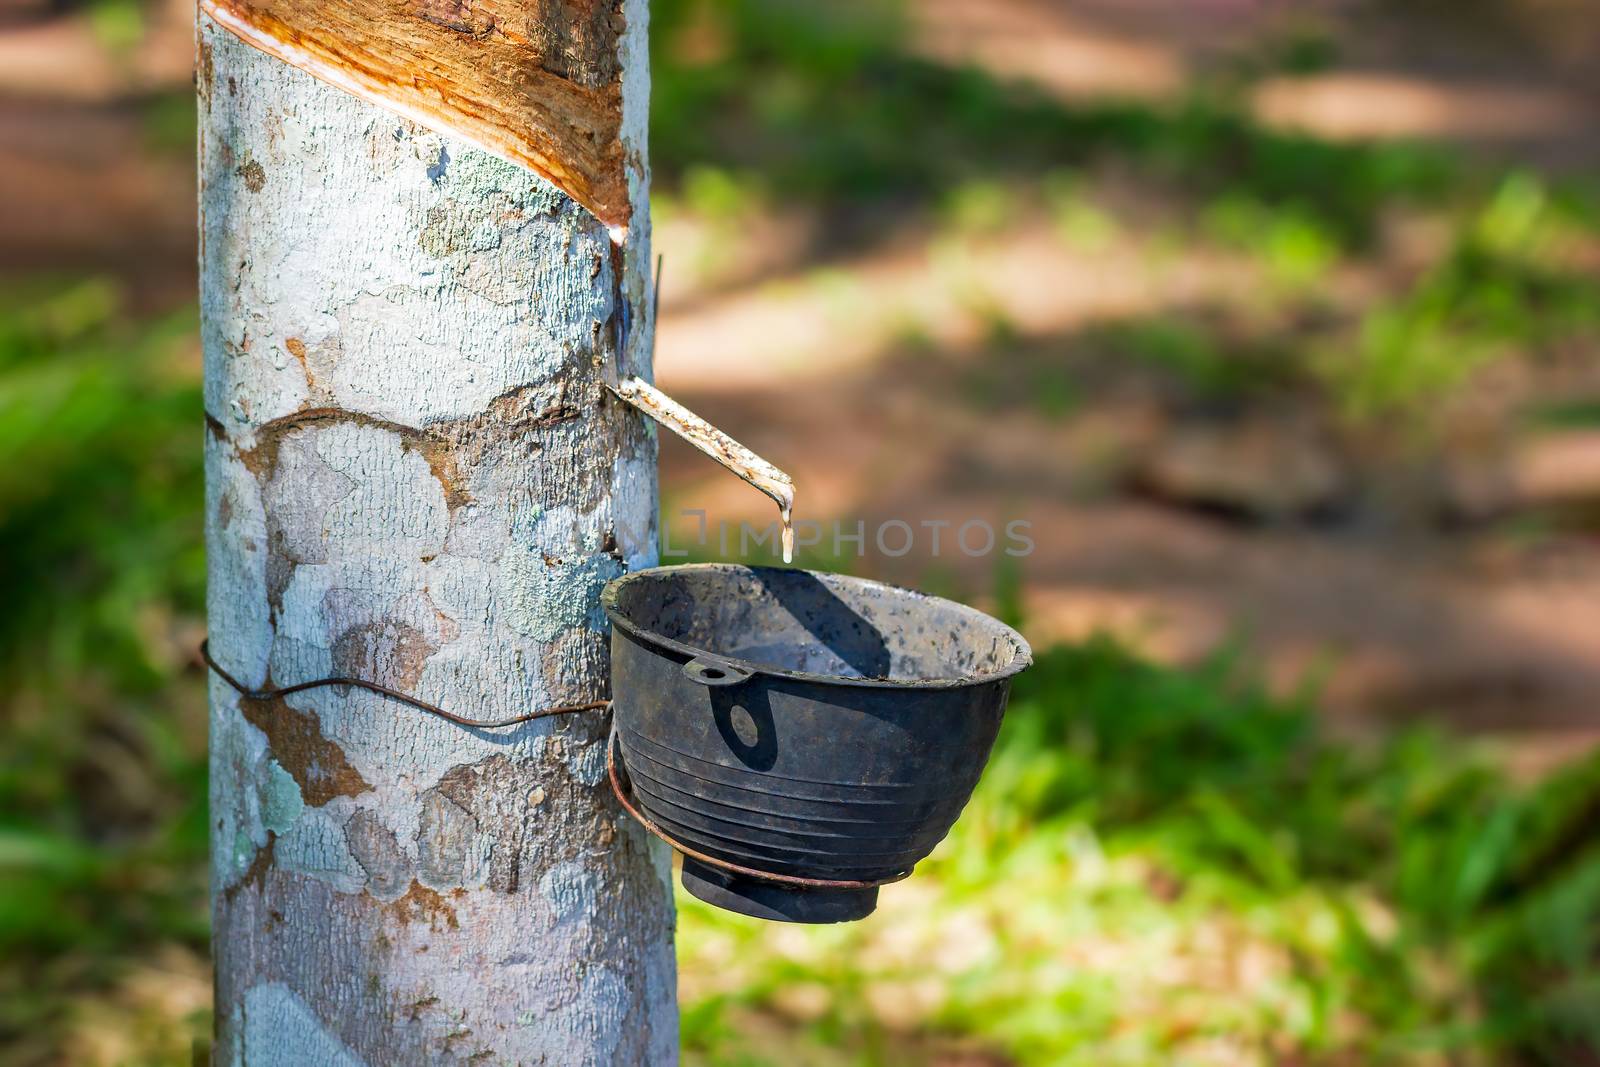 The latex of rubber flows down from the tree into the bowl and morning sunlight.